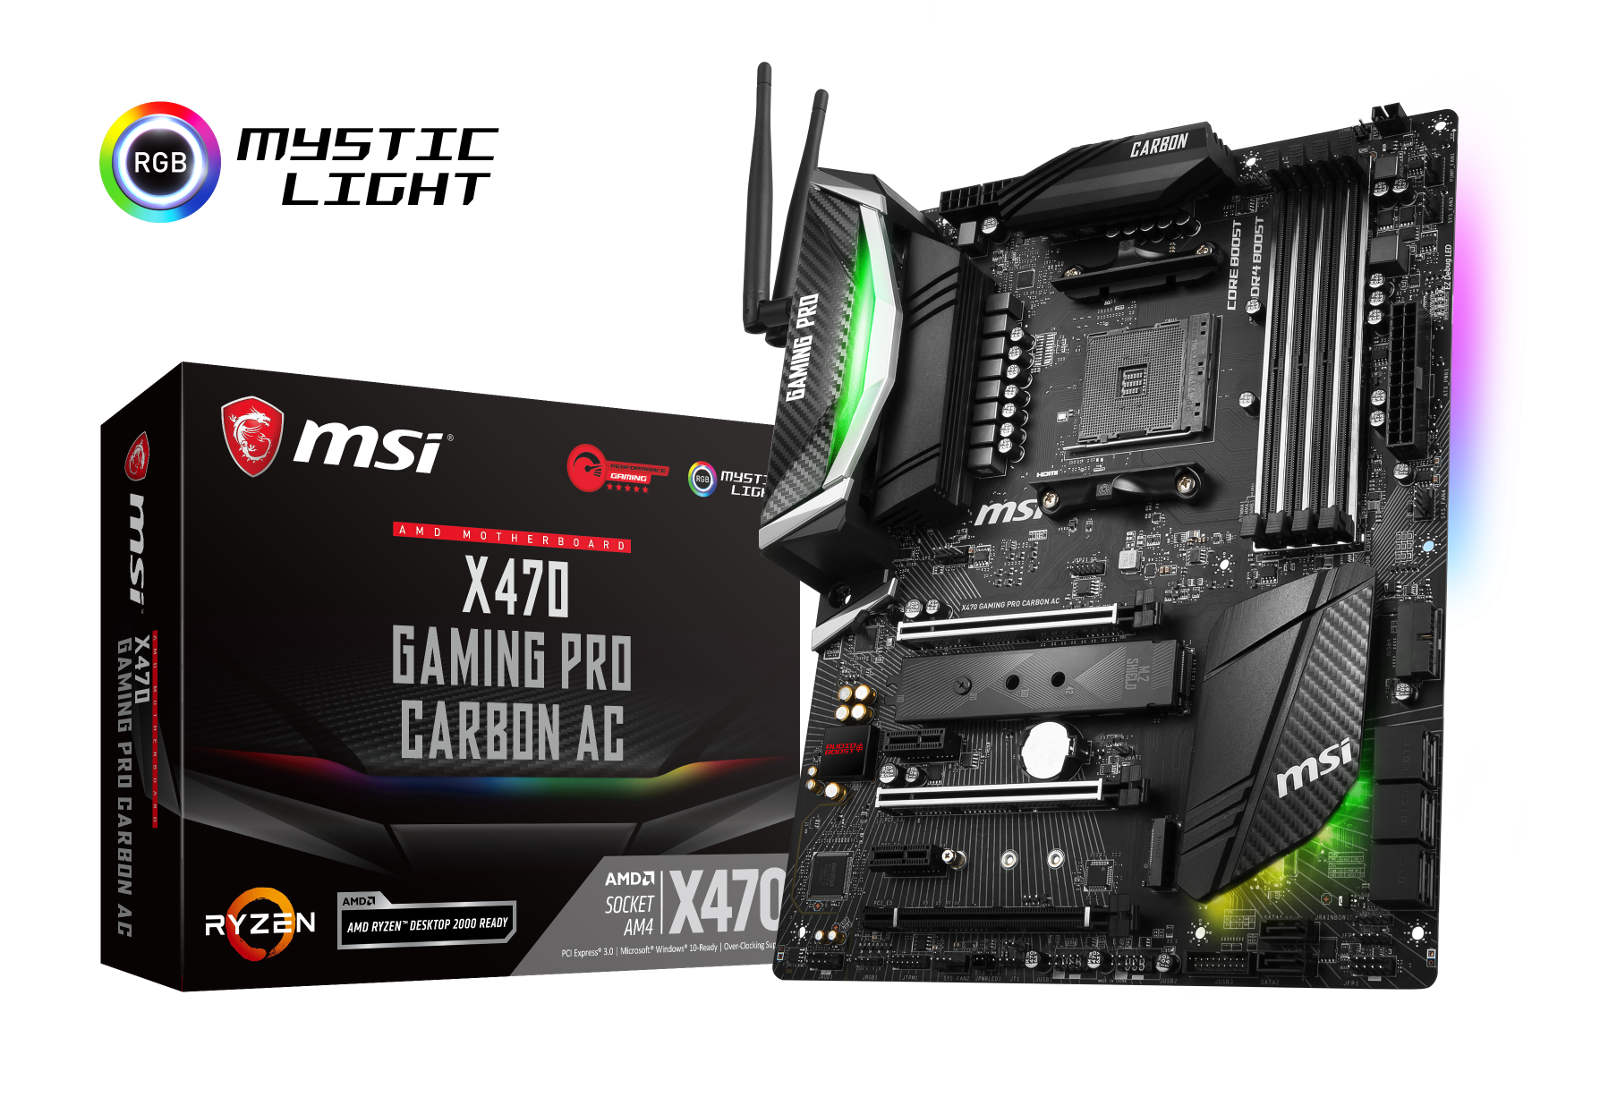 MSI X470 Gaming Pro Carbon AC Mainboard mit Verpackung